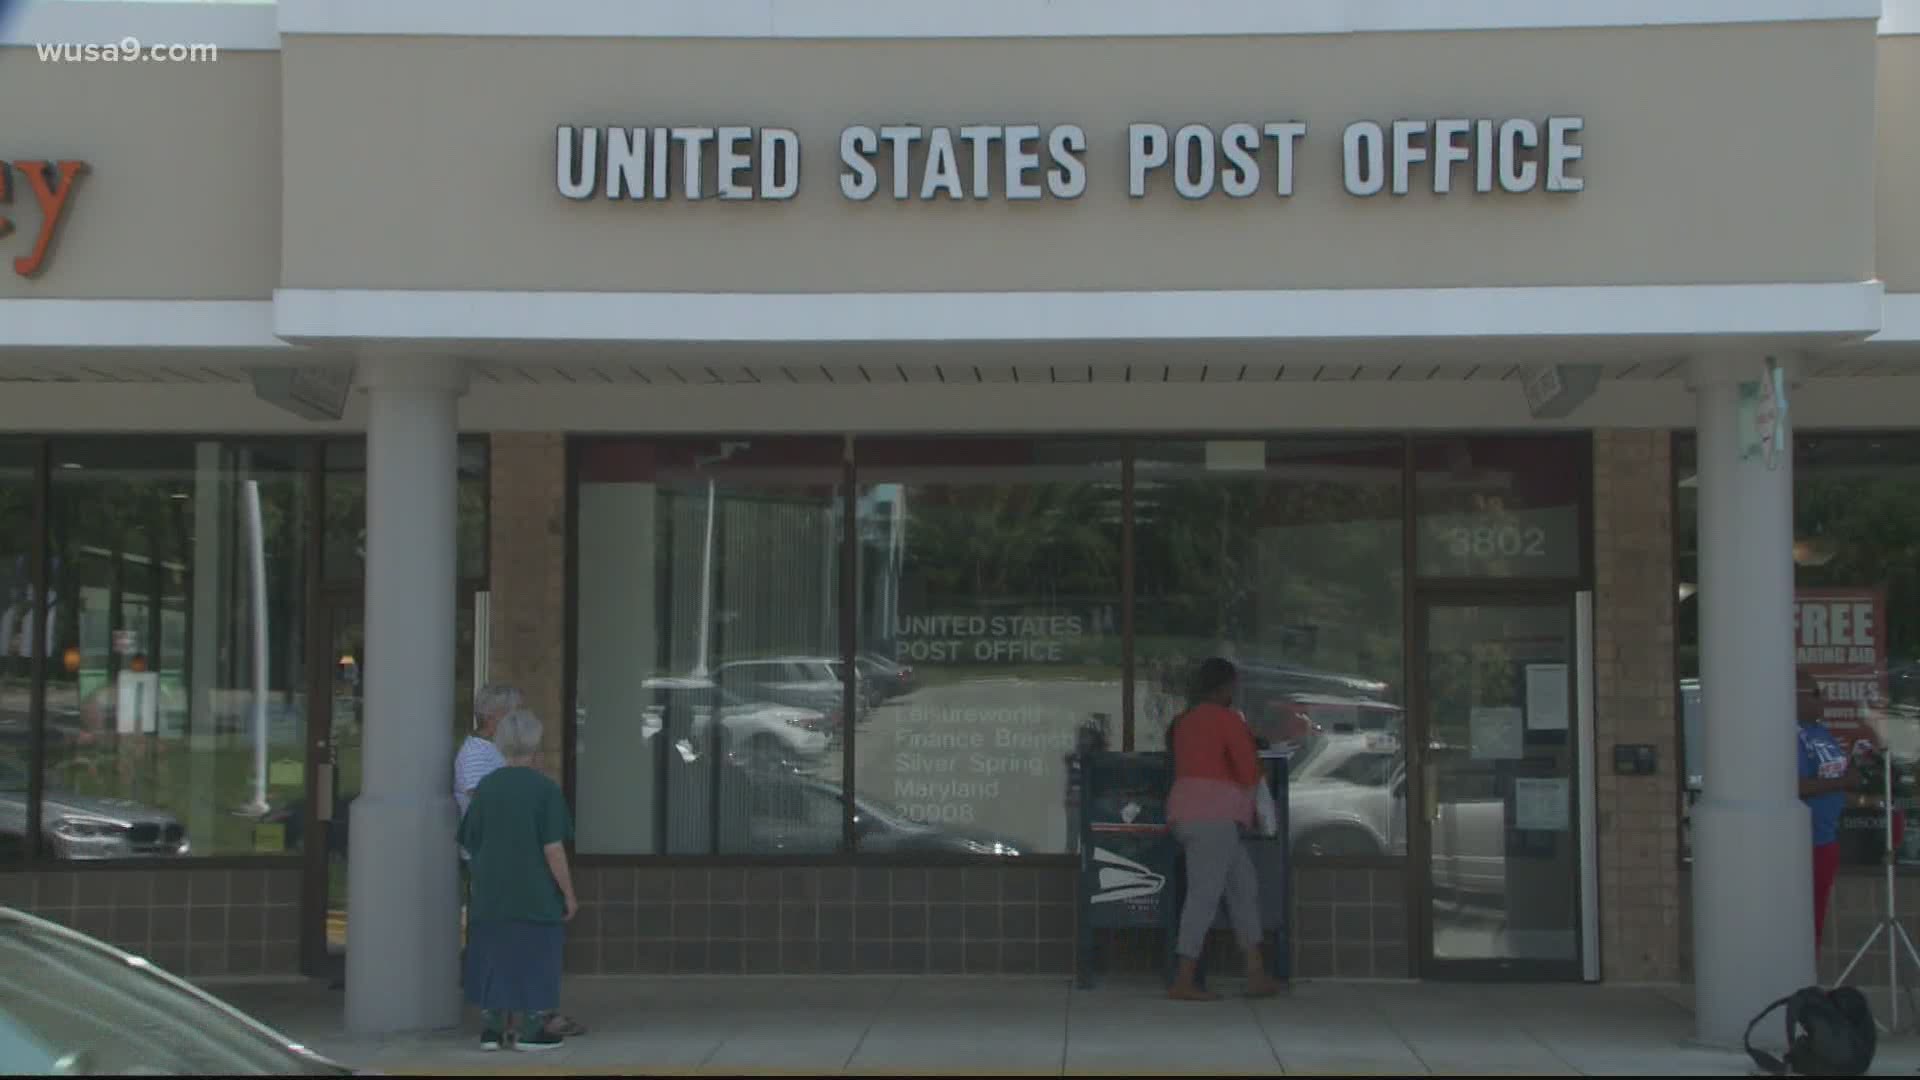 Democrats demand a post office bailout, but some experts say the only solution is privatizing the service